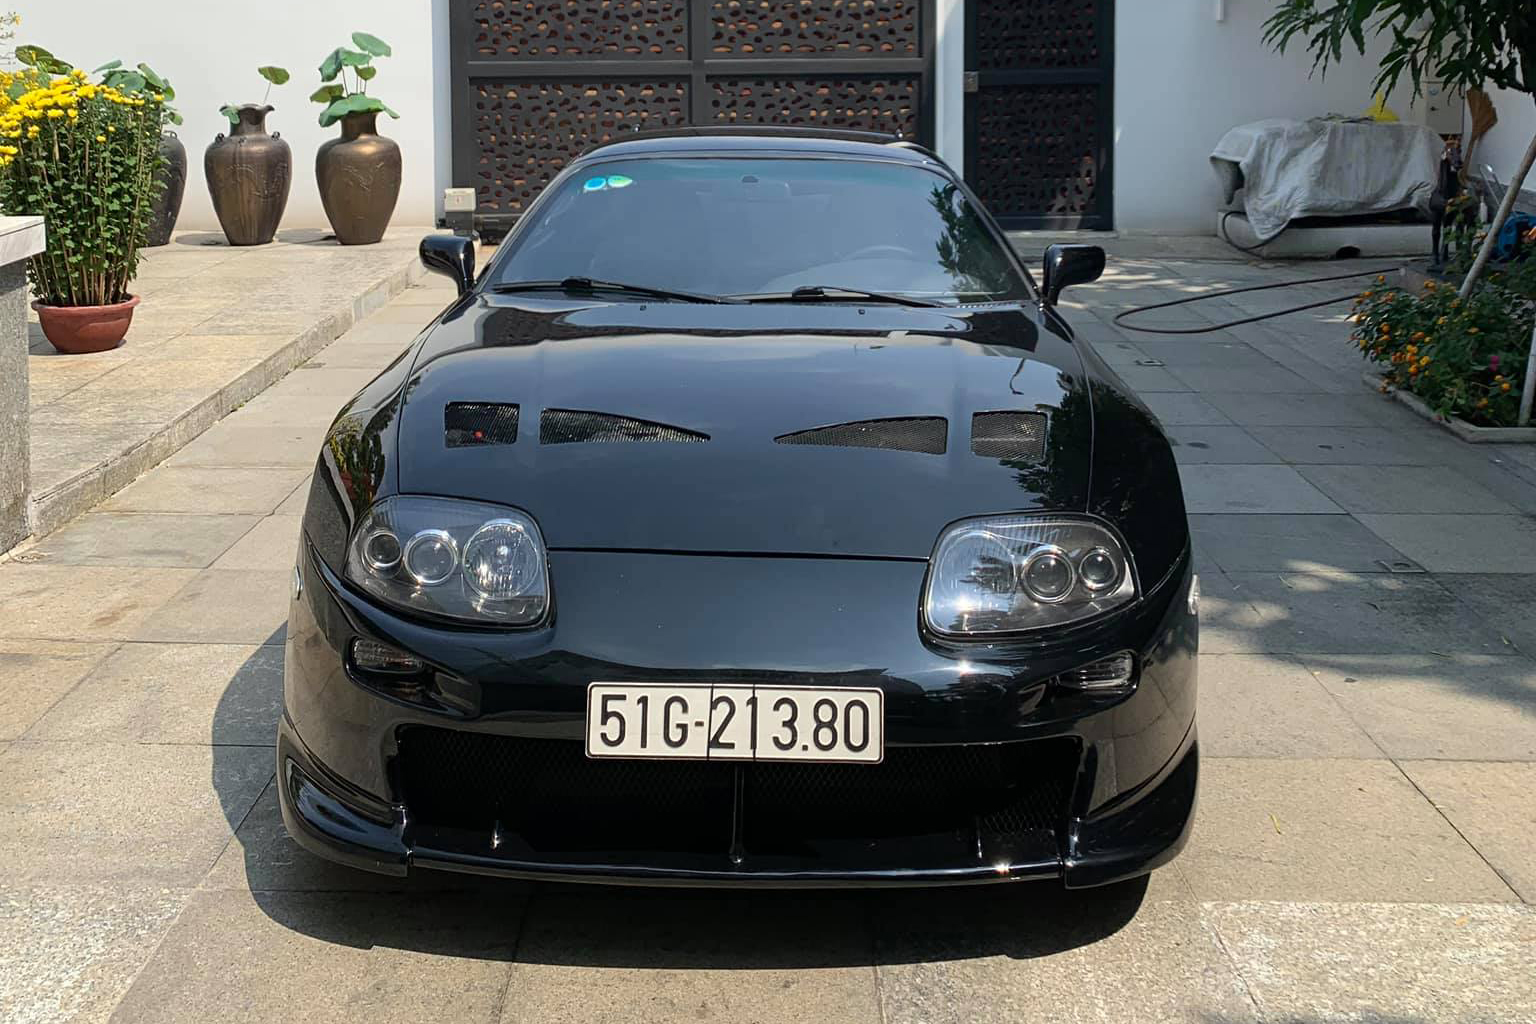 toyota-supra-the-he-4-trung-nguyen-cafeautovn-7